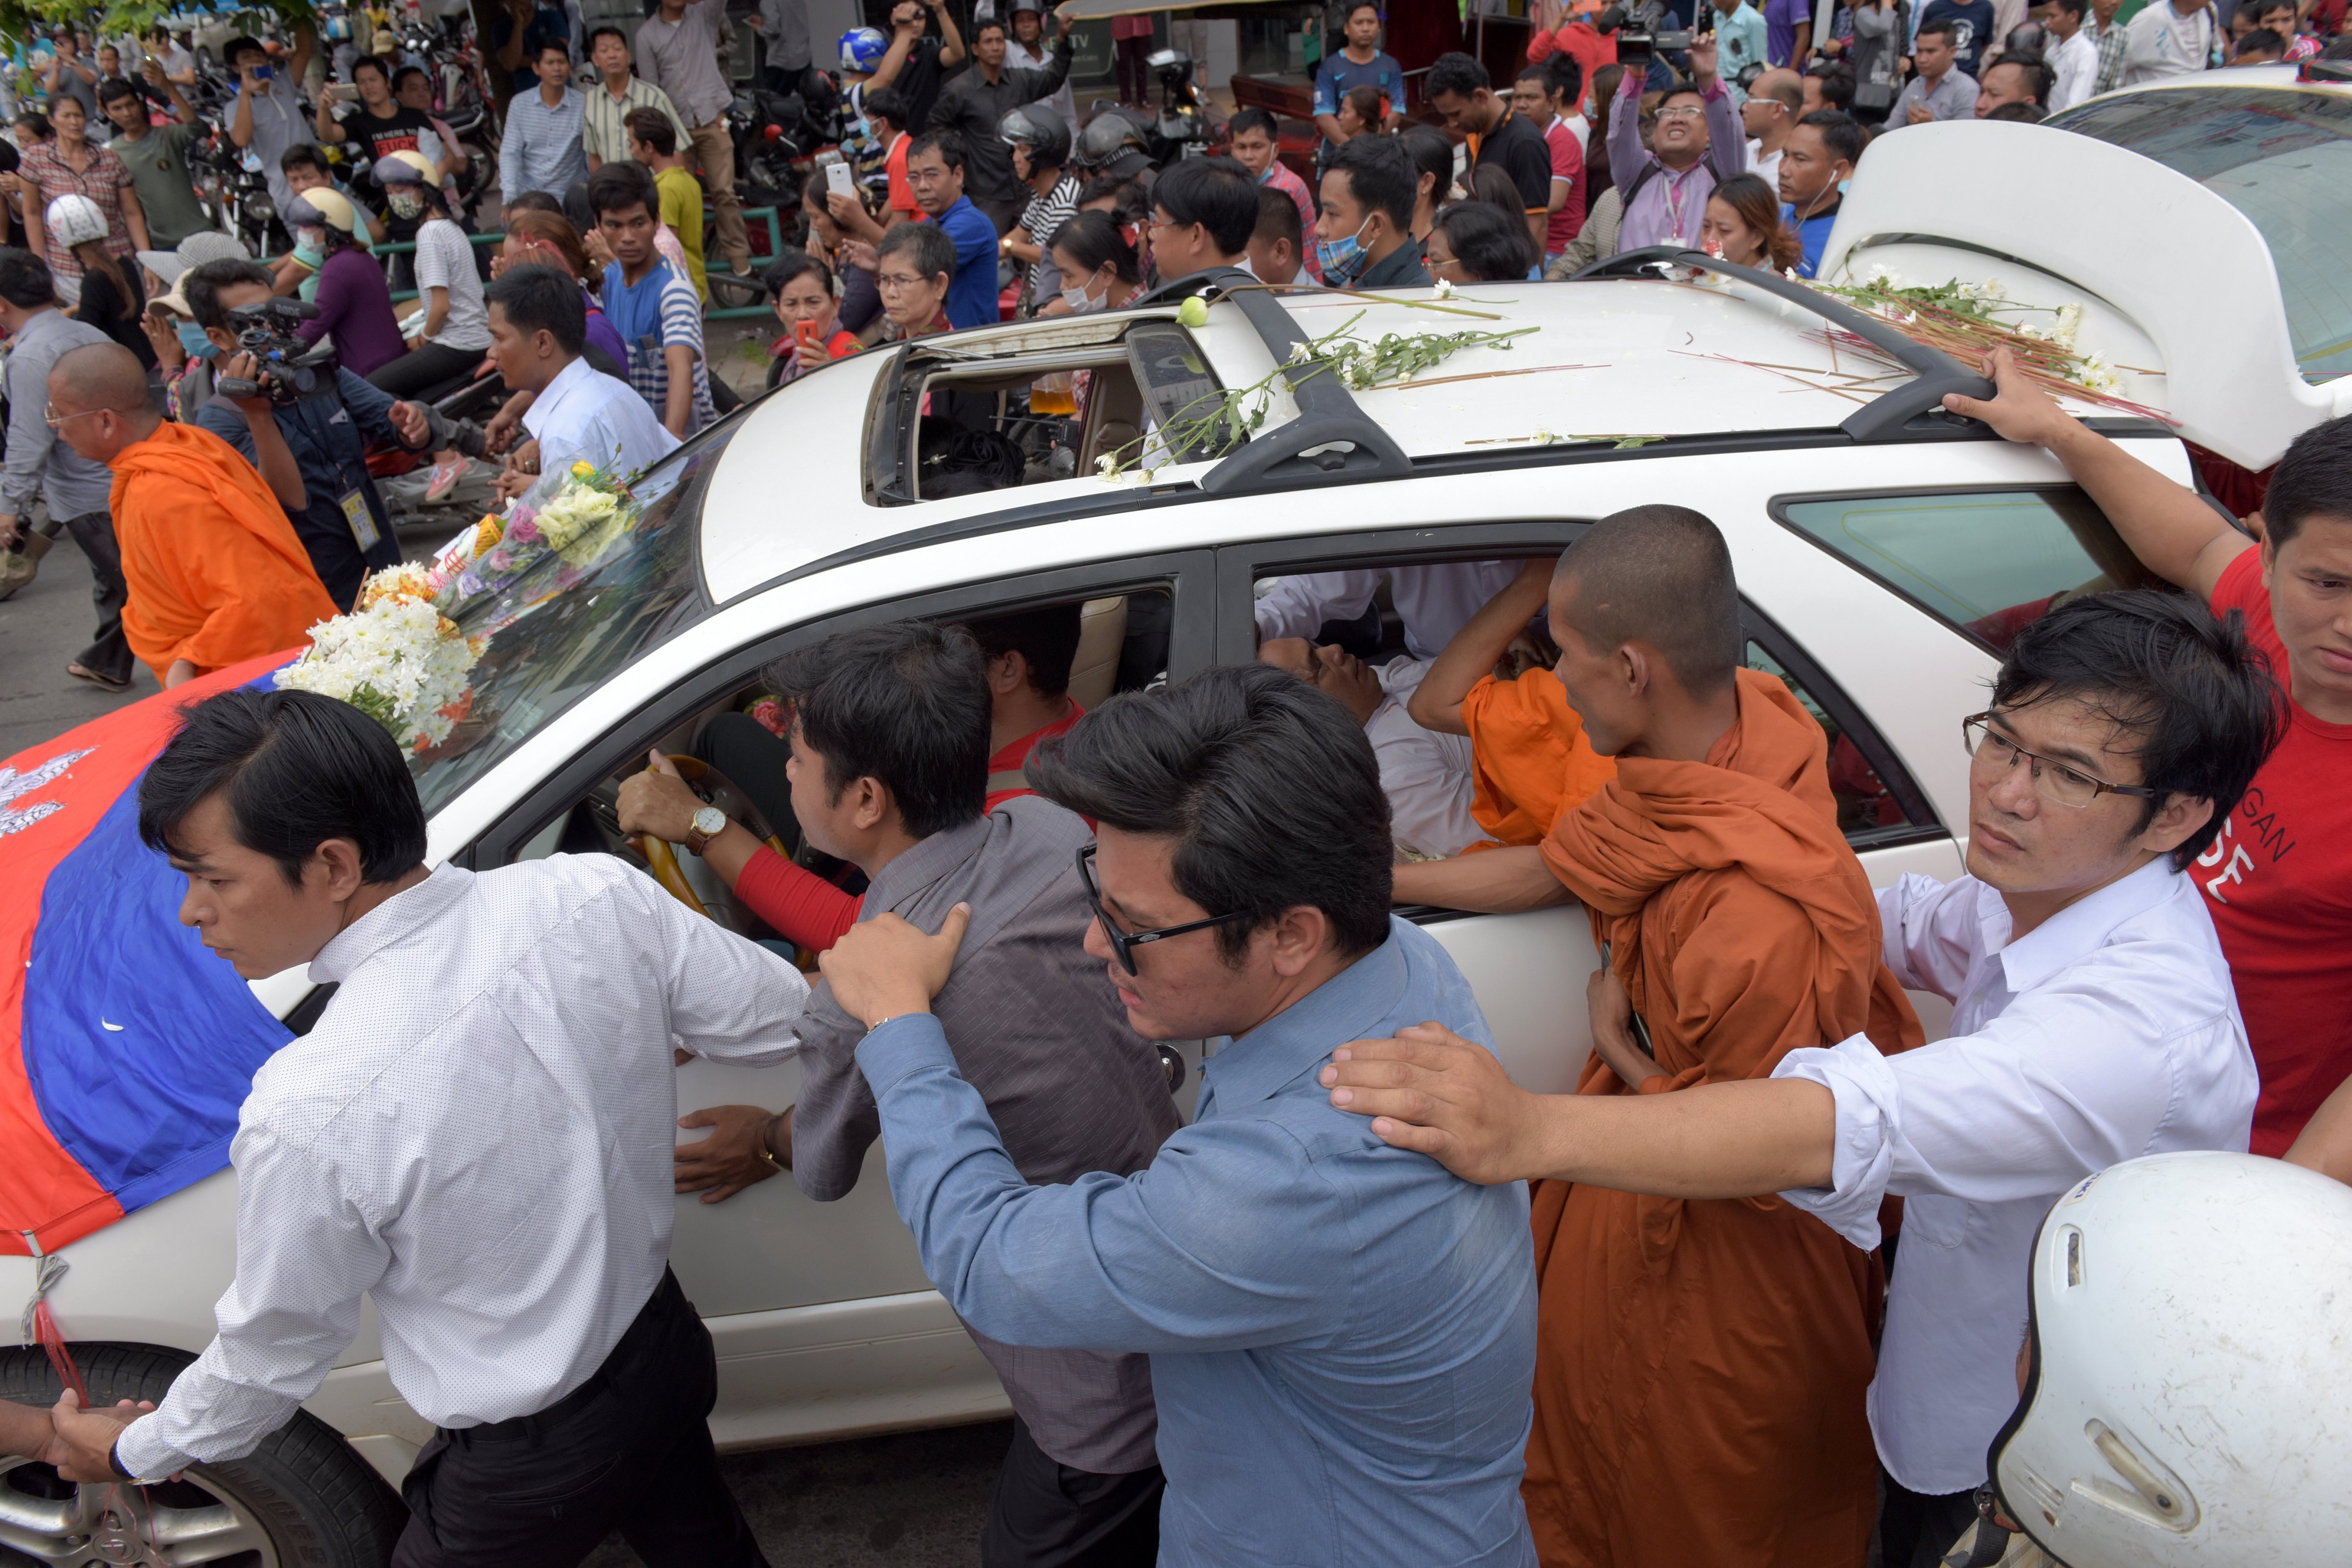 Cambodians walk along a car transporting the body of activist Kem Ley who was shot dead earlier in the day in Phnom Penh on July 10, 2016 (Tang Chhin Sothy—AFP/Getty Images)